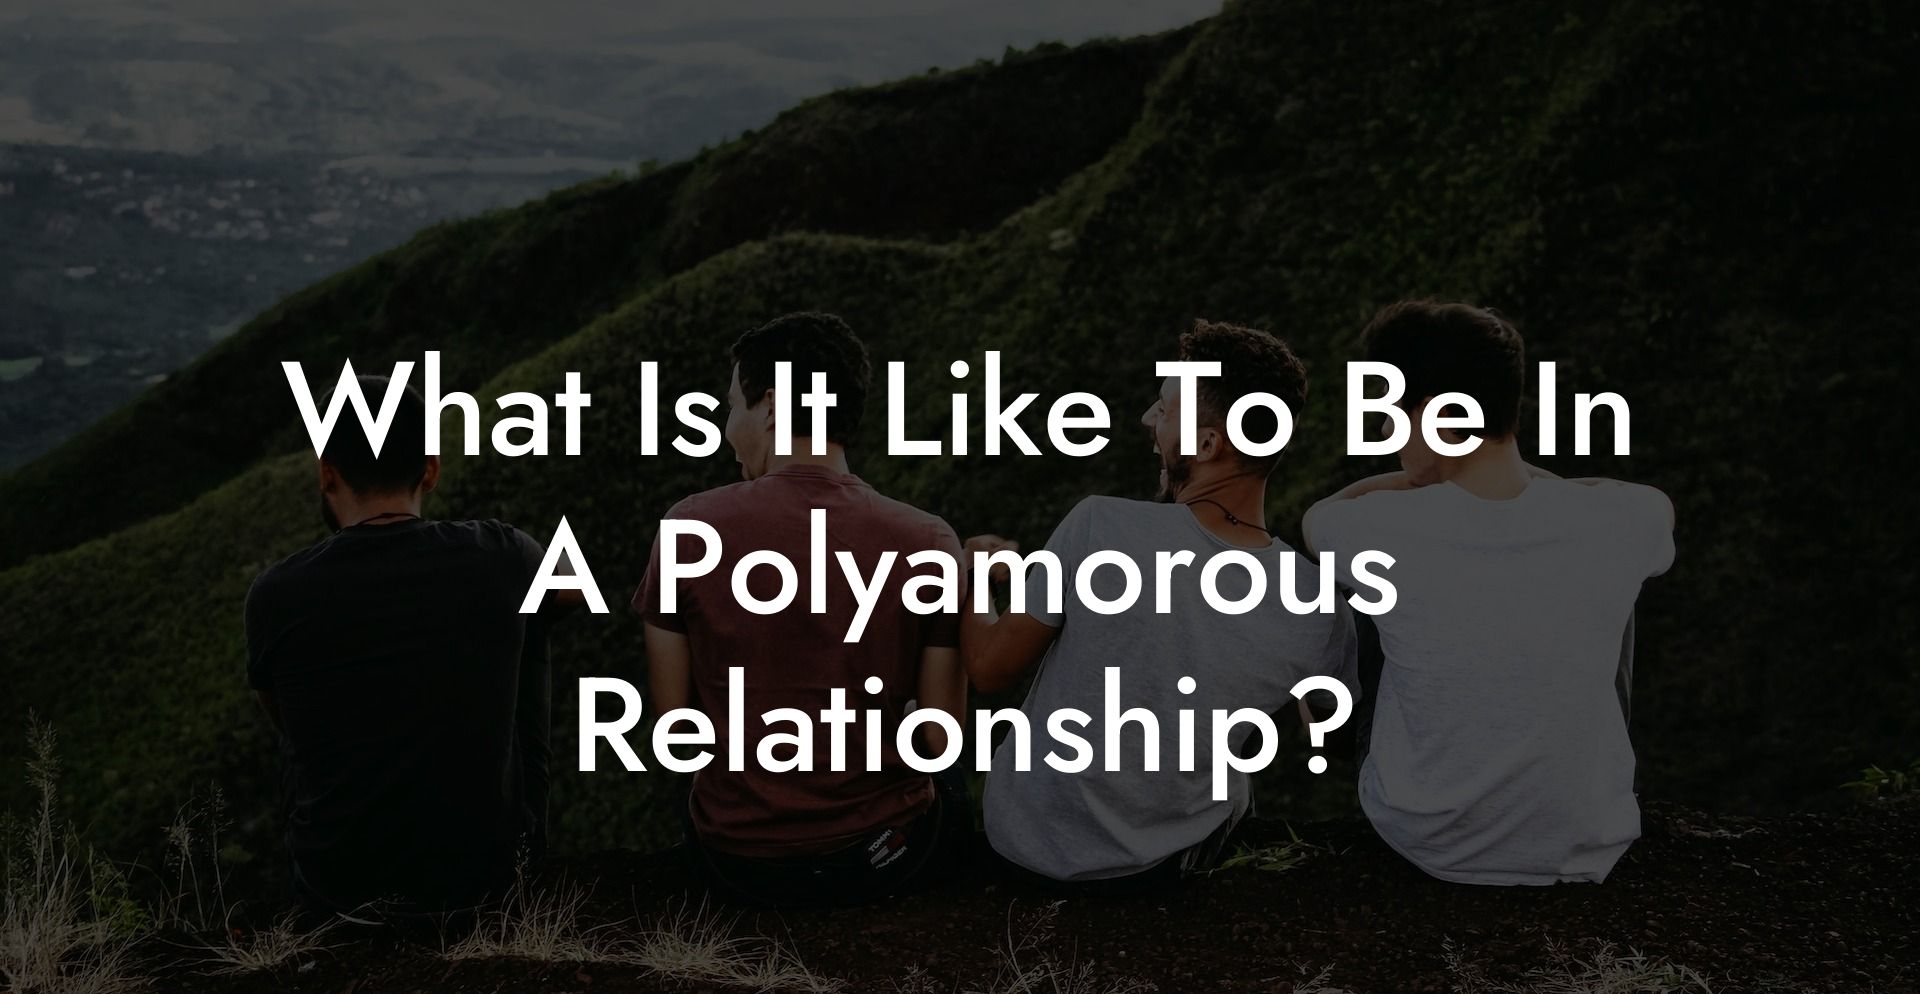 What Is It Like To Be In A Polyamorous Relationship?